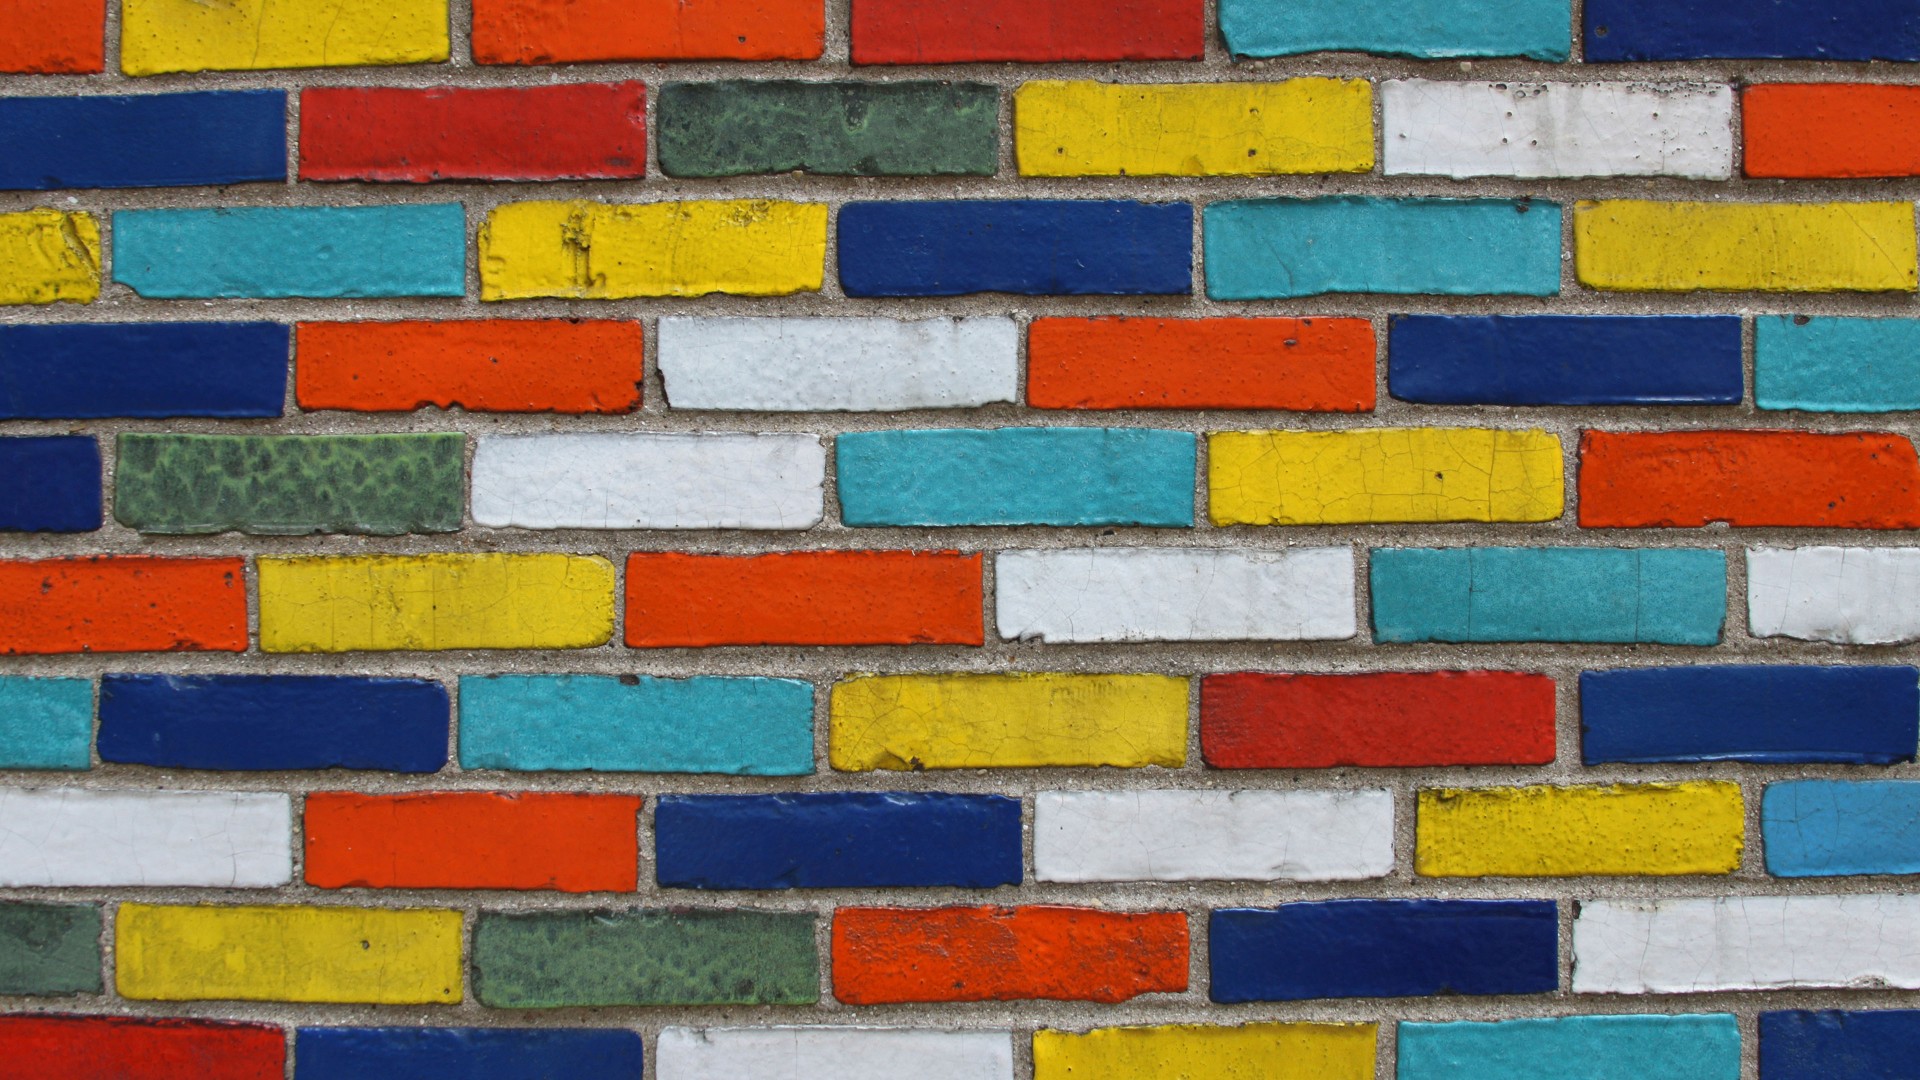 40 Hd Brick Wallpapers Backgrounds For Free Download